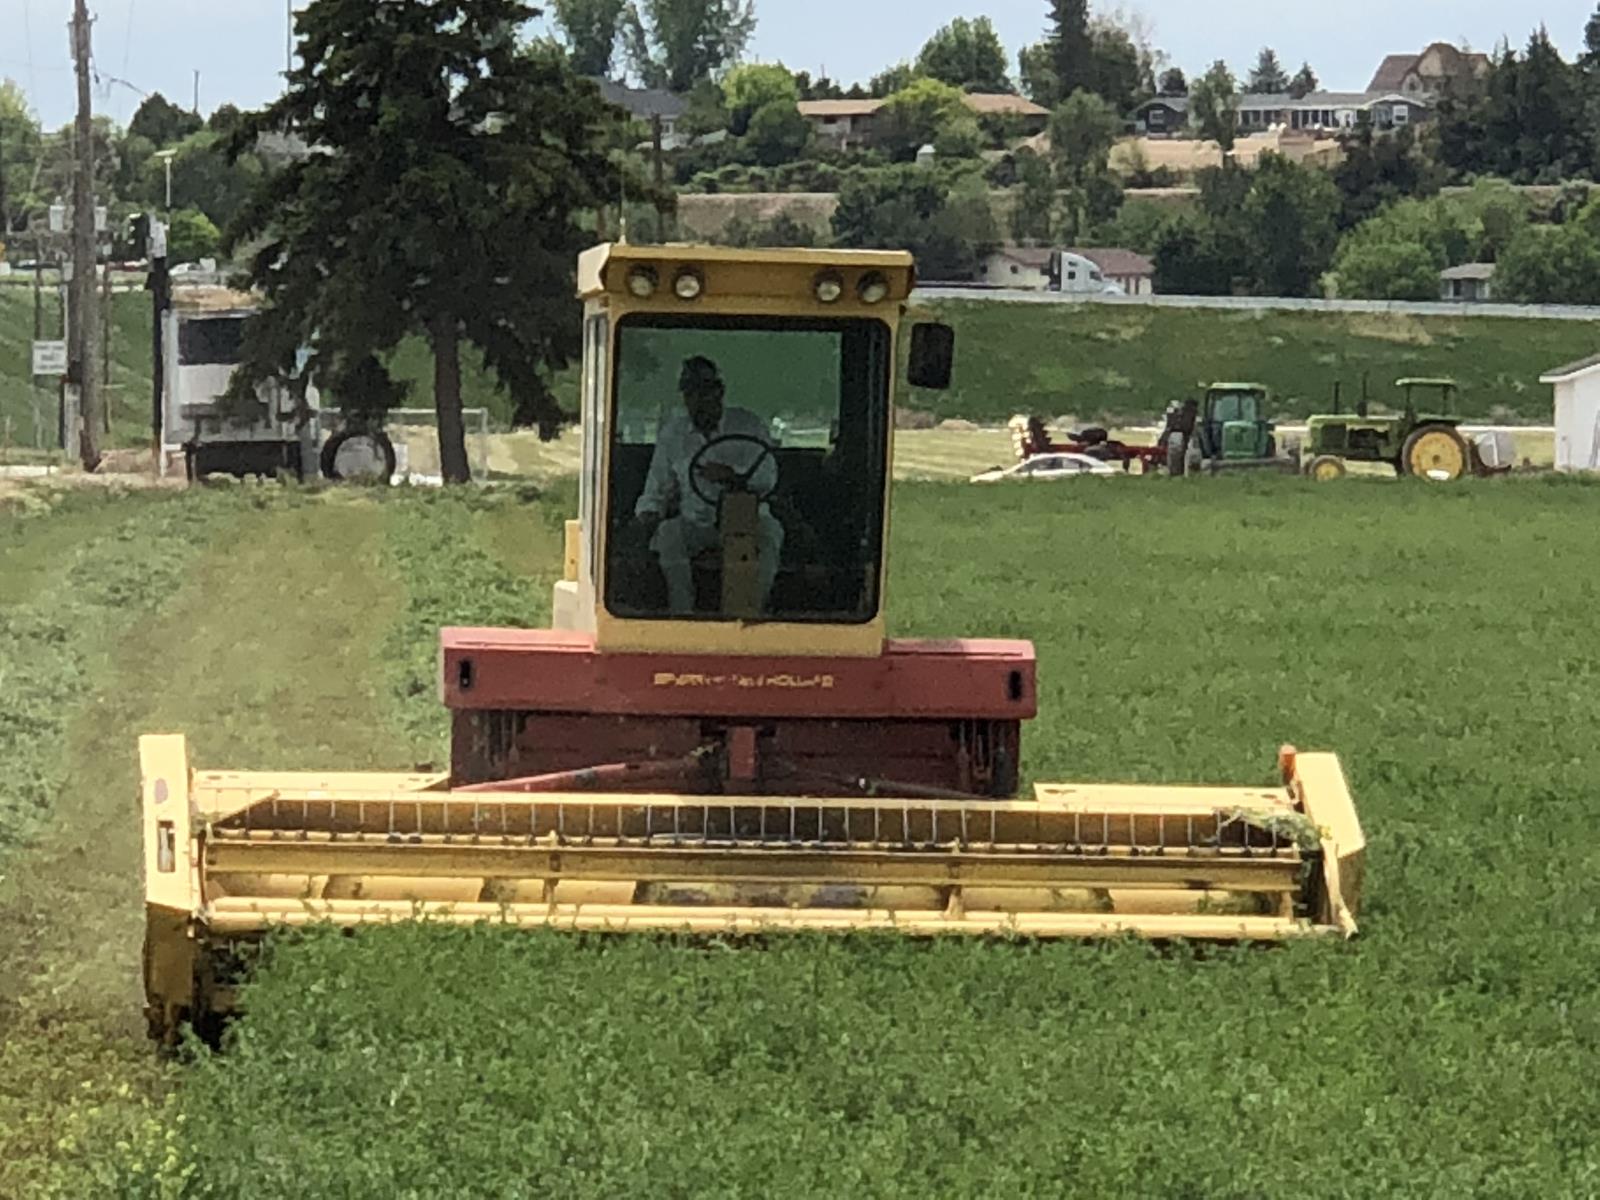 Hay is harvested in a field in Meridian last year. According to USDA’s National Agricultural Statistics Service, the total value of agricultural production in Idaho increased 4 percent in 2020, to $8.4 billion.